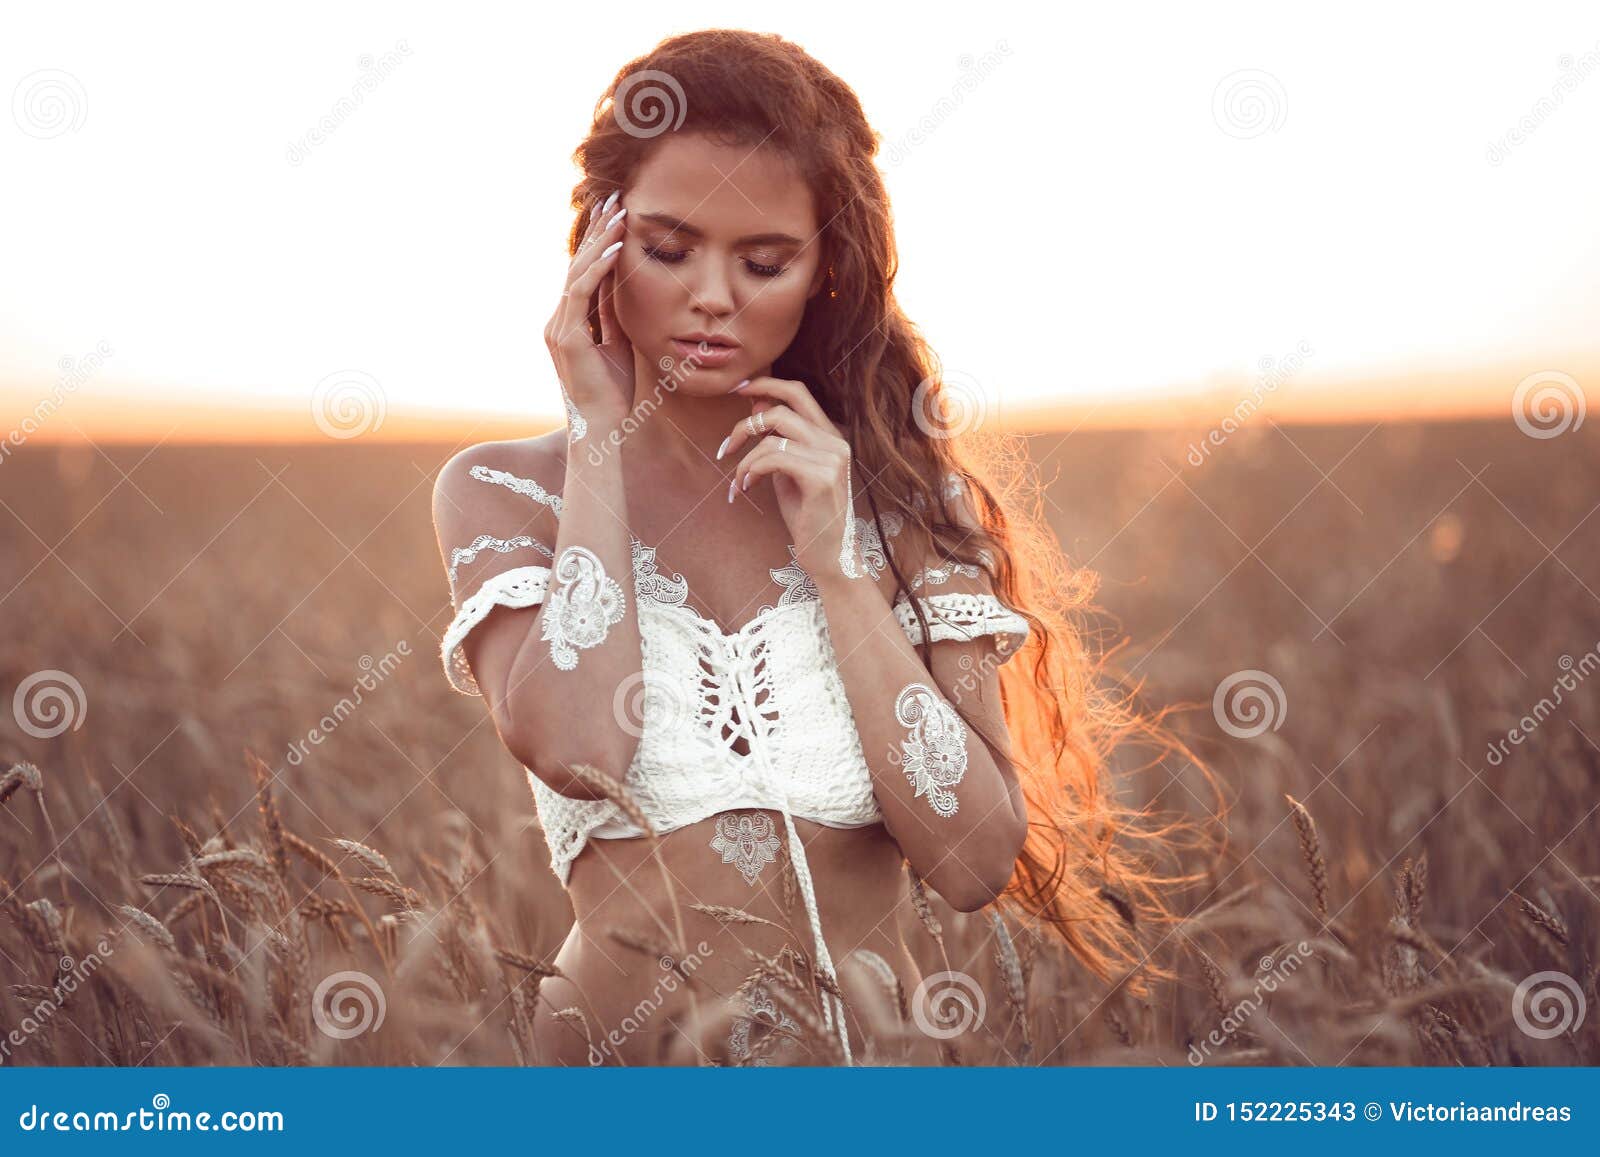 boho chic style. portrait of bohemian girl with white art posing over wheat field enjoying at sunset. outdoors photo. tranquility